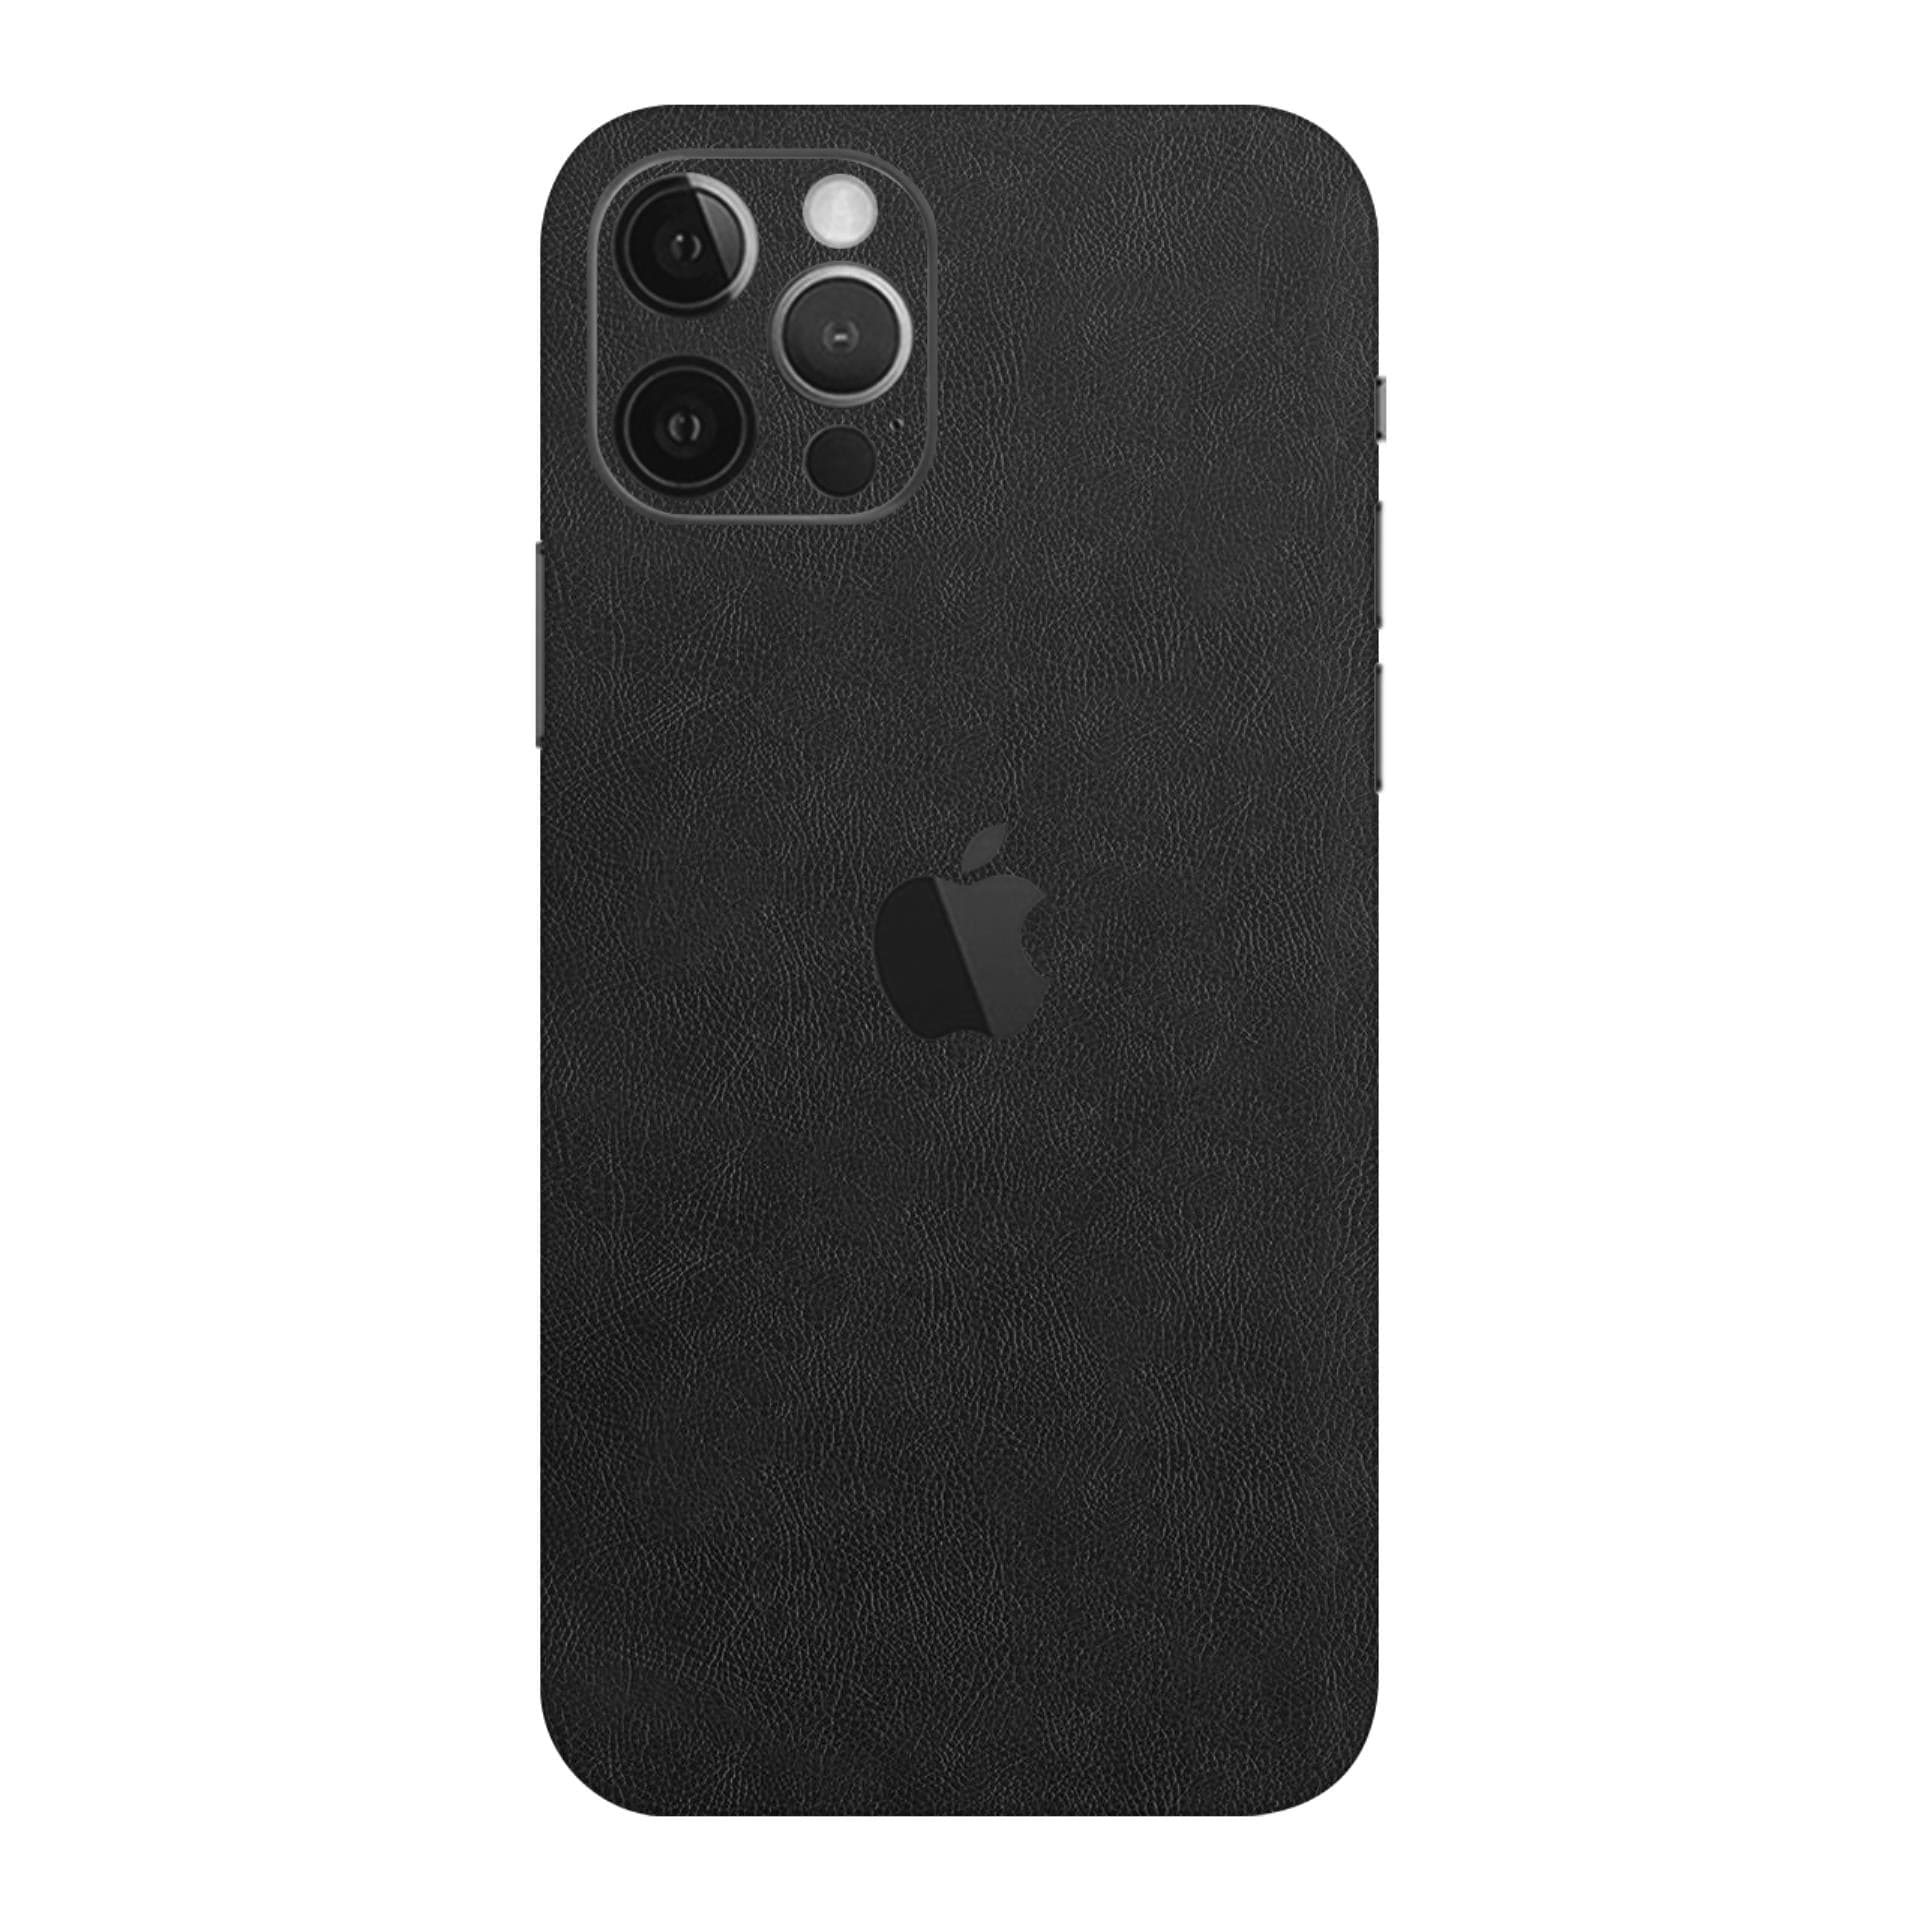 iphone 12 Pro Max Black Leather skins